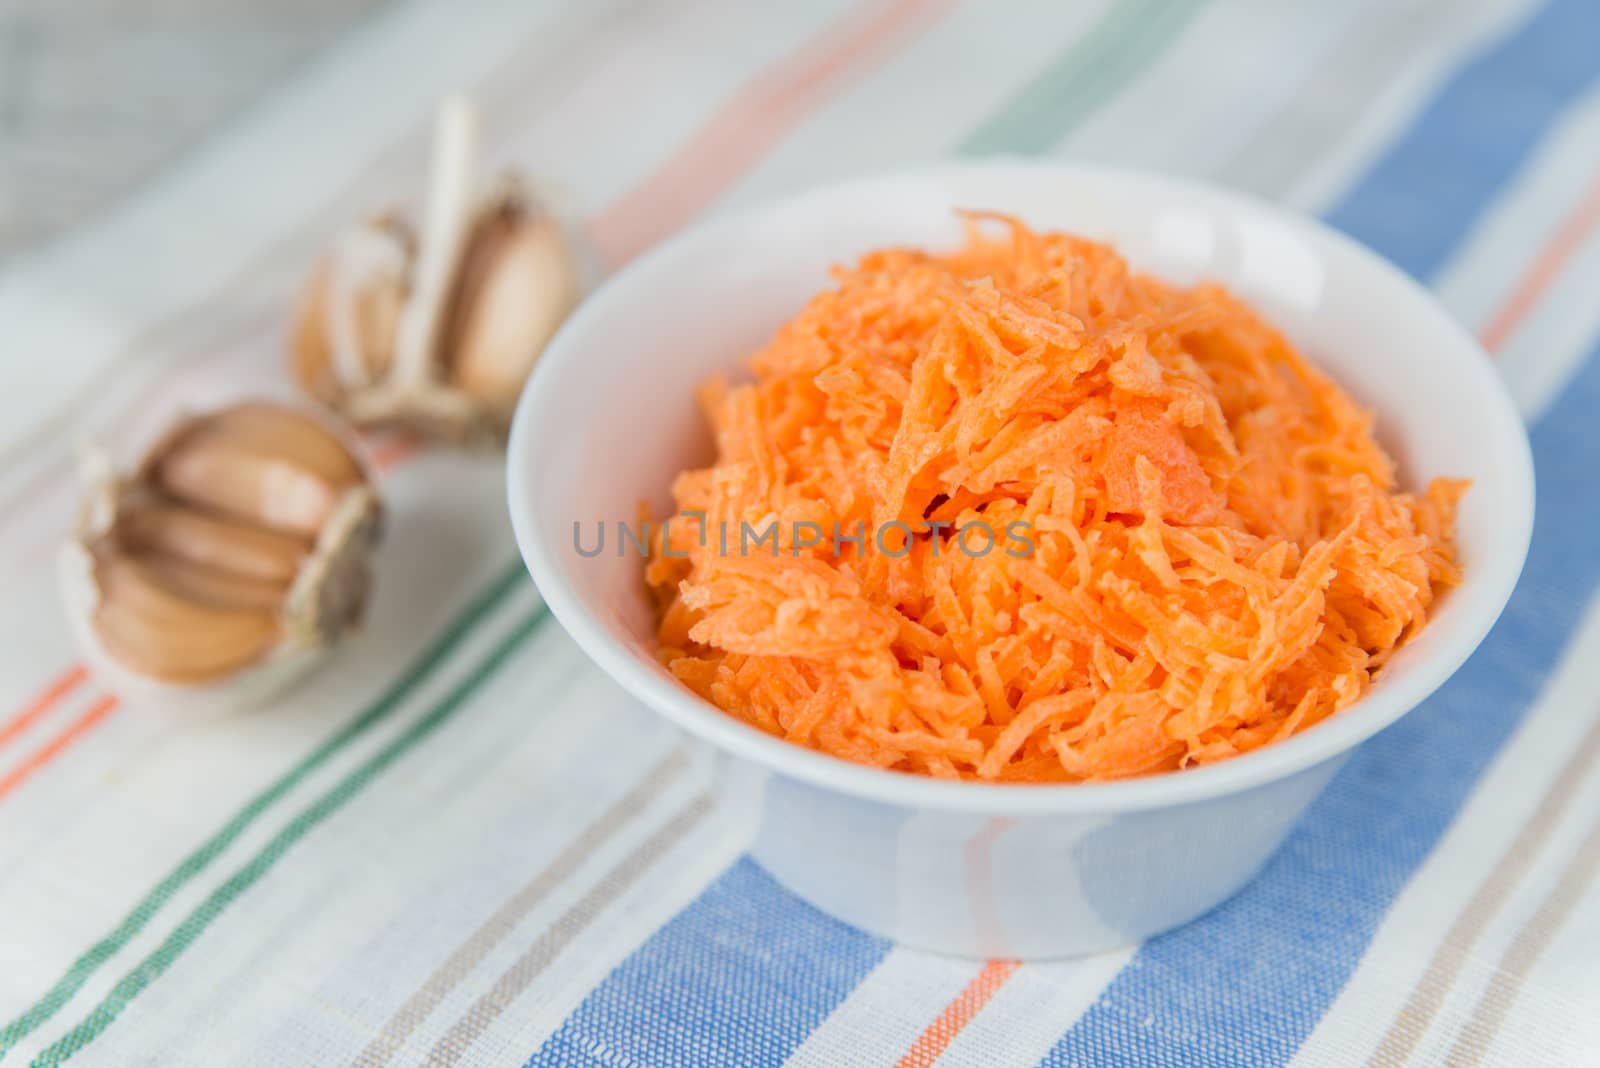 Carrot salad in the white plate by Linaga